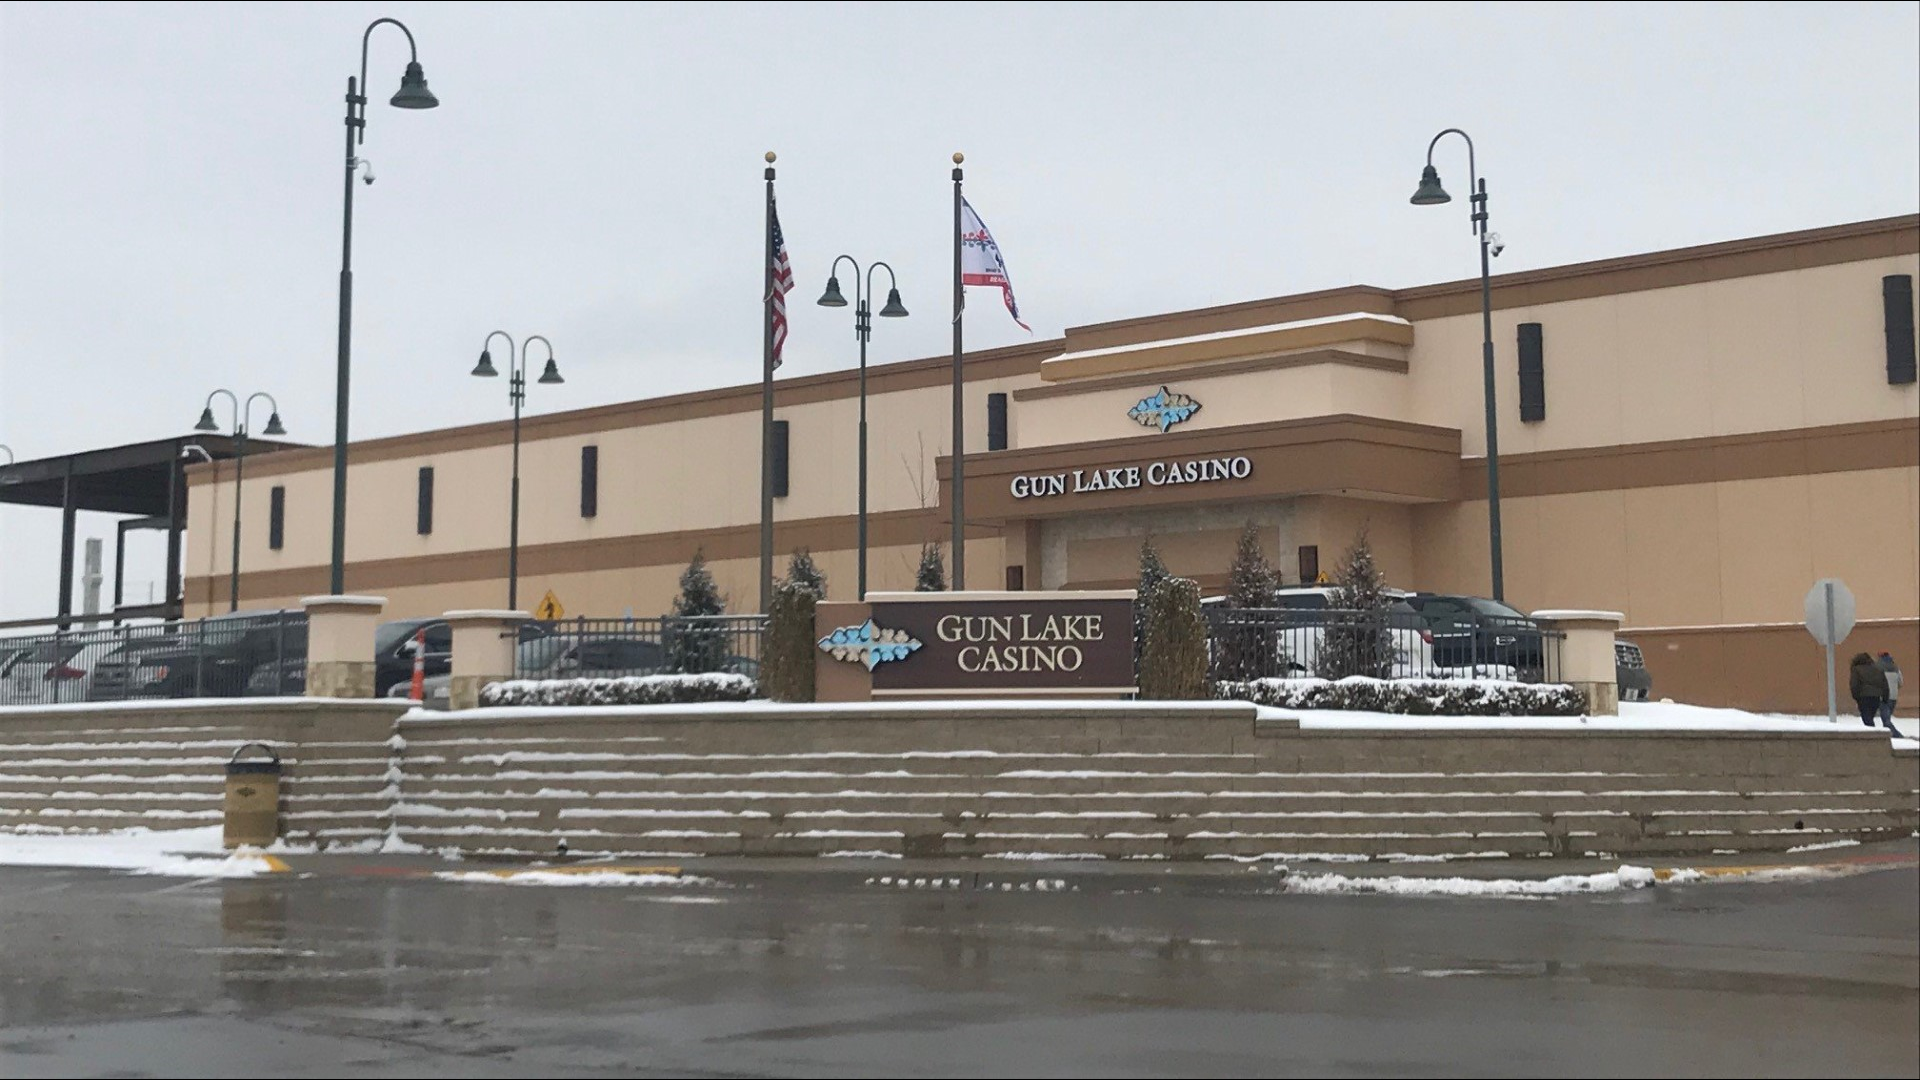 The state's dine-in restaurant ban was extended until Feb. 1, however Gun Lake Casino is not bound to the state order.